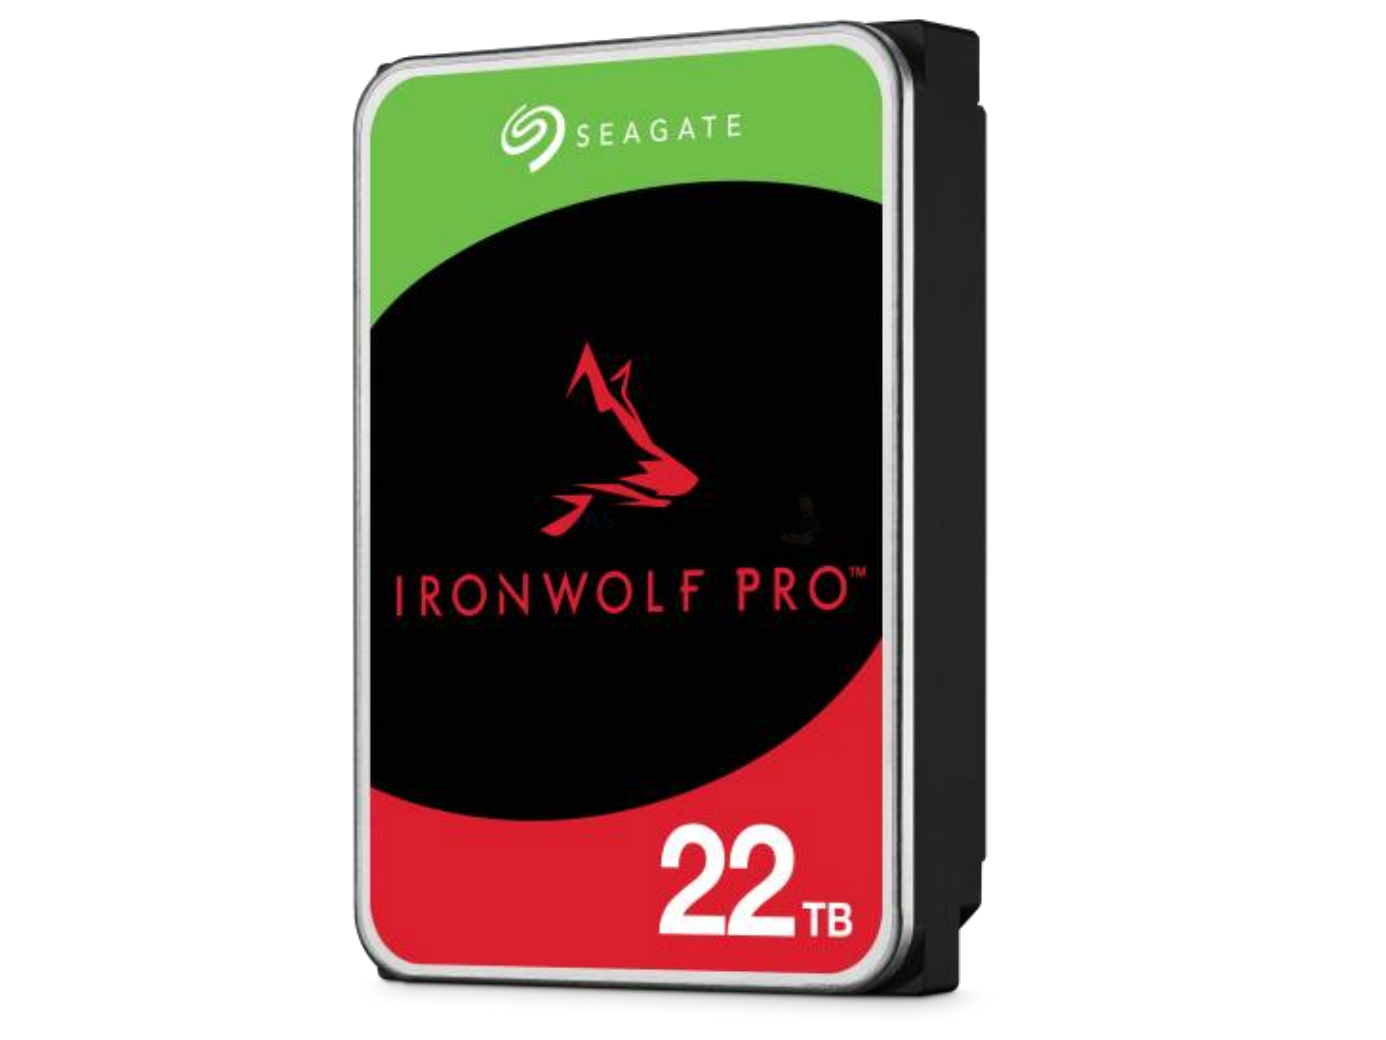 Seagate Increases Ironwolf Pro NAS Hard Drive Capacity to 22TB and Partners with QNAP